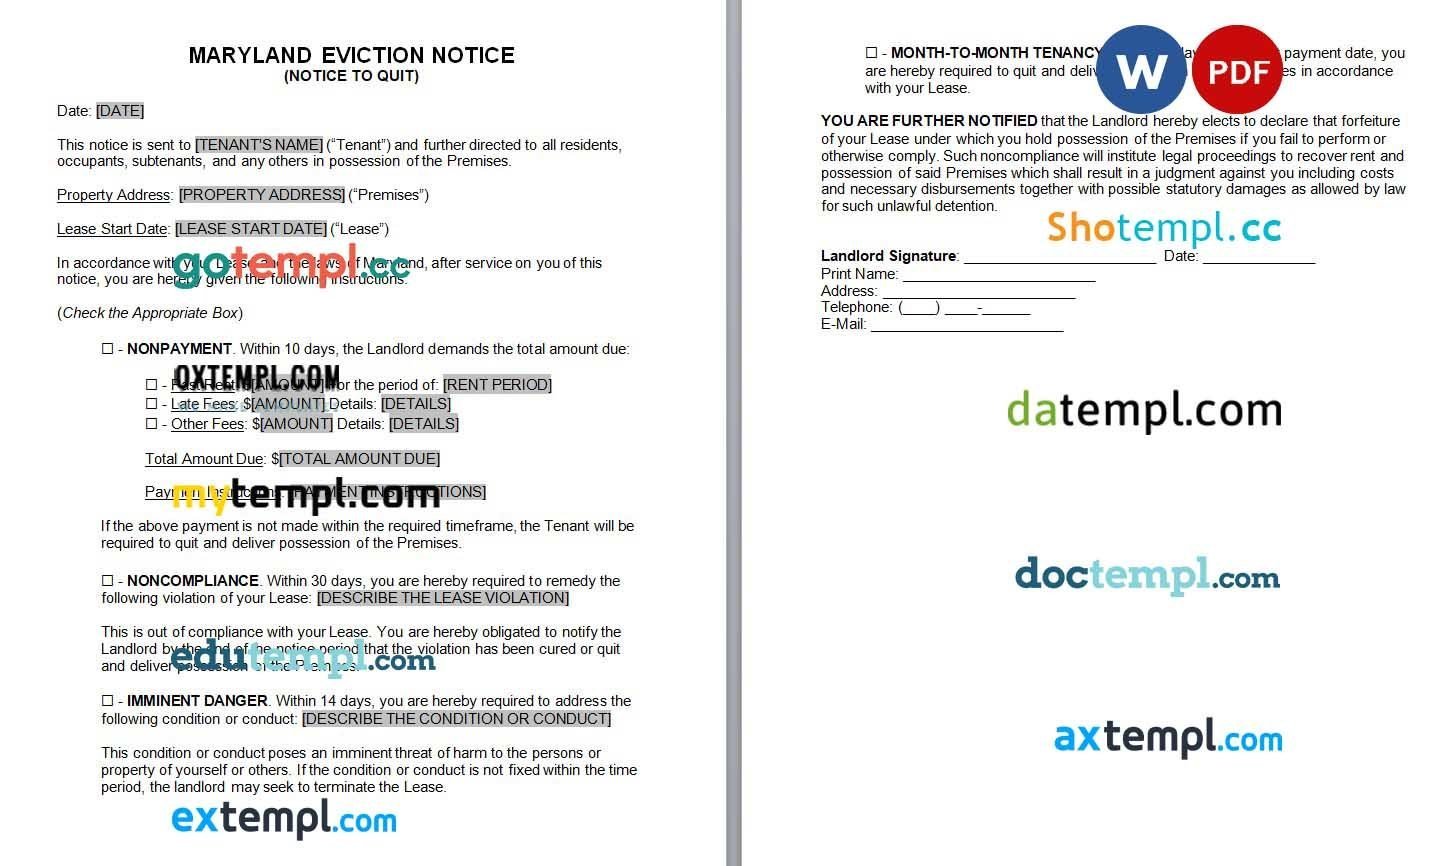 Maryland Eviction Notice to Quit Form Word example, fully editable